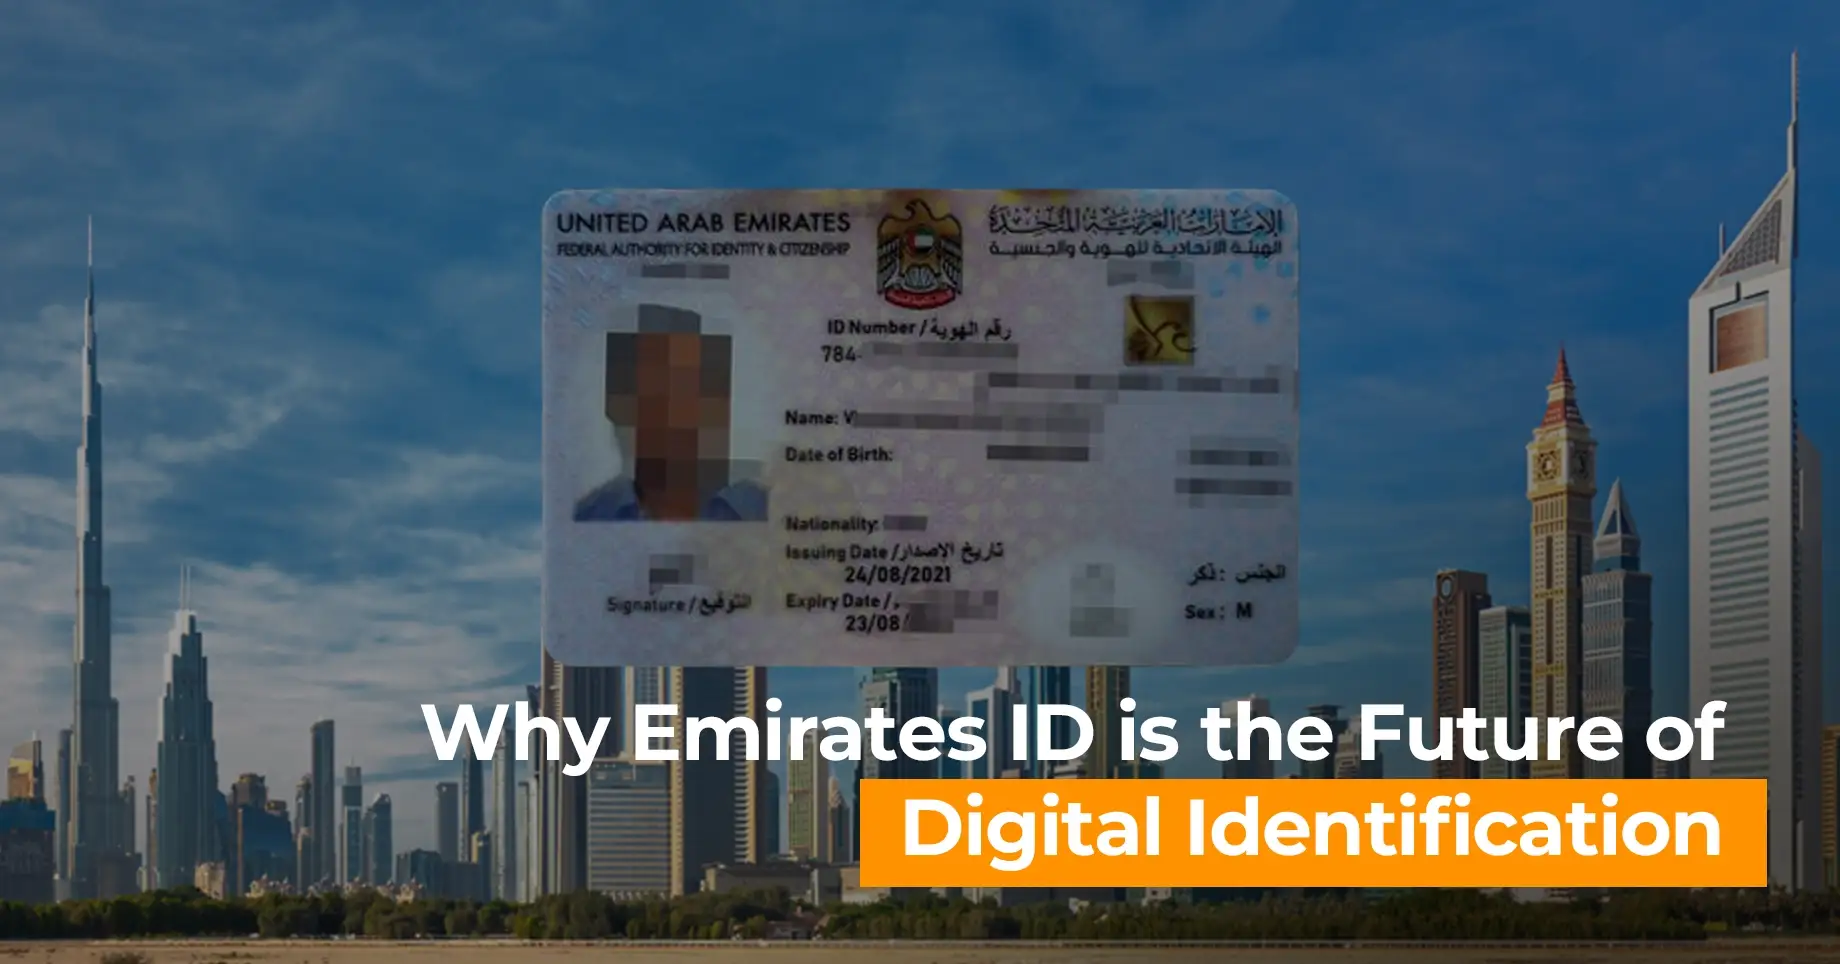 Why Emirates ID is the Future of Digital Identification